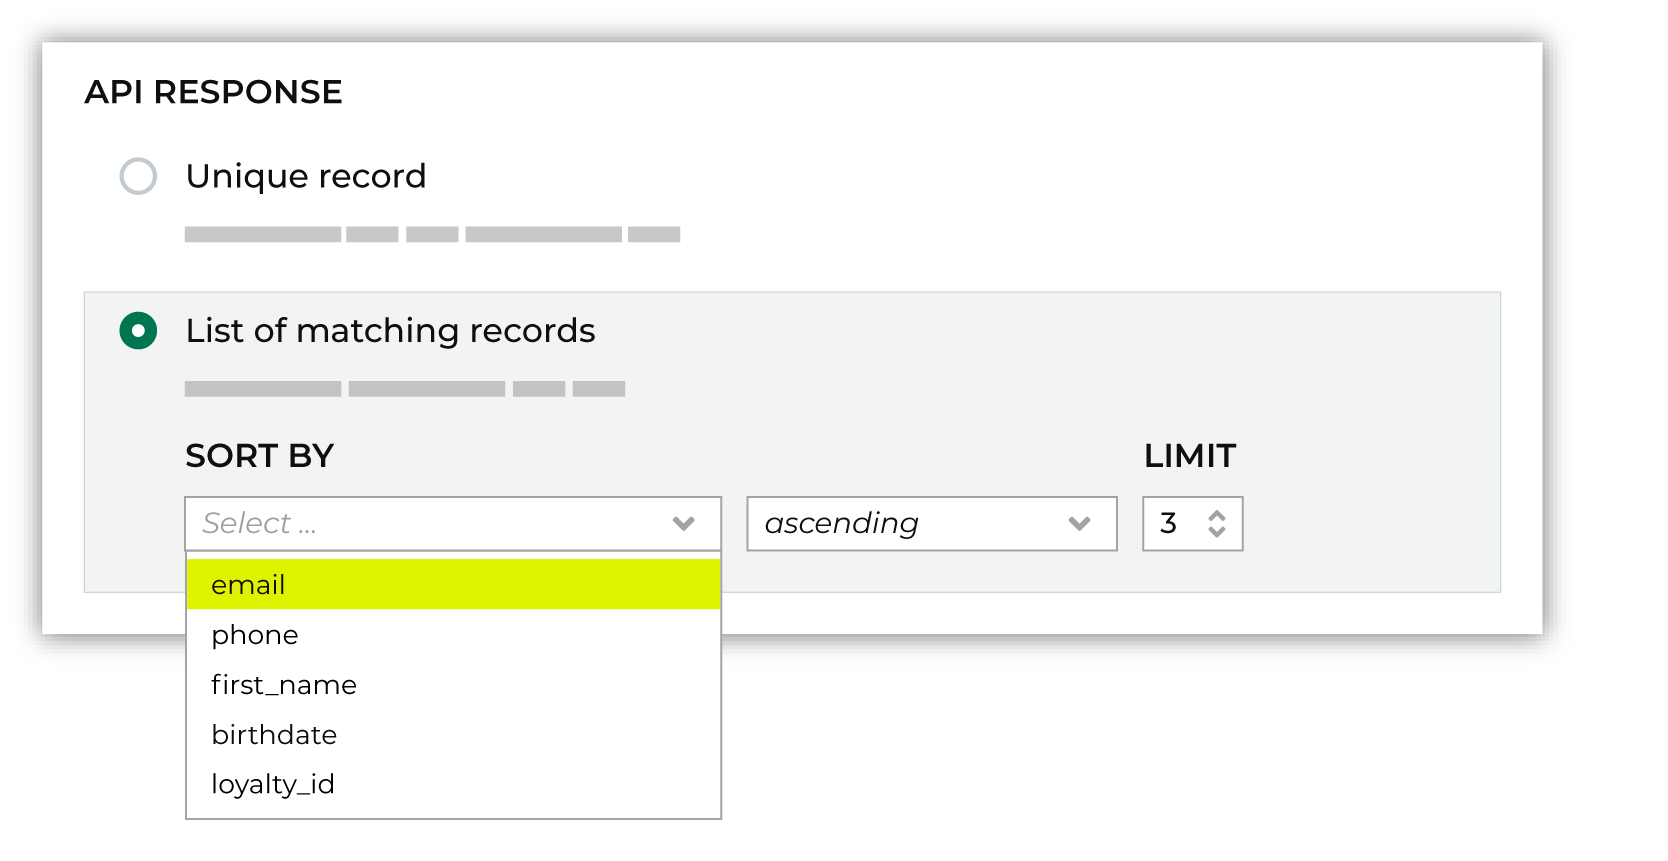 Configure an endpoint to respond with unique records.